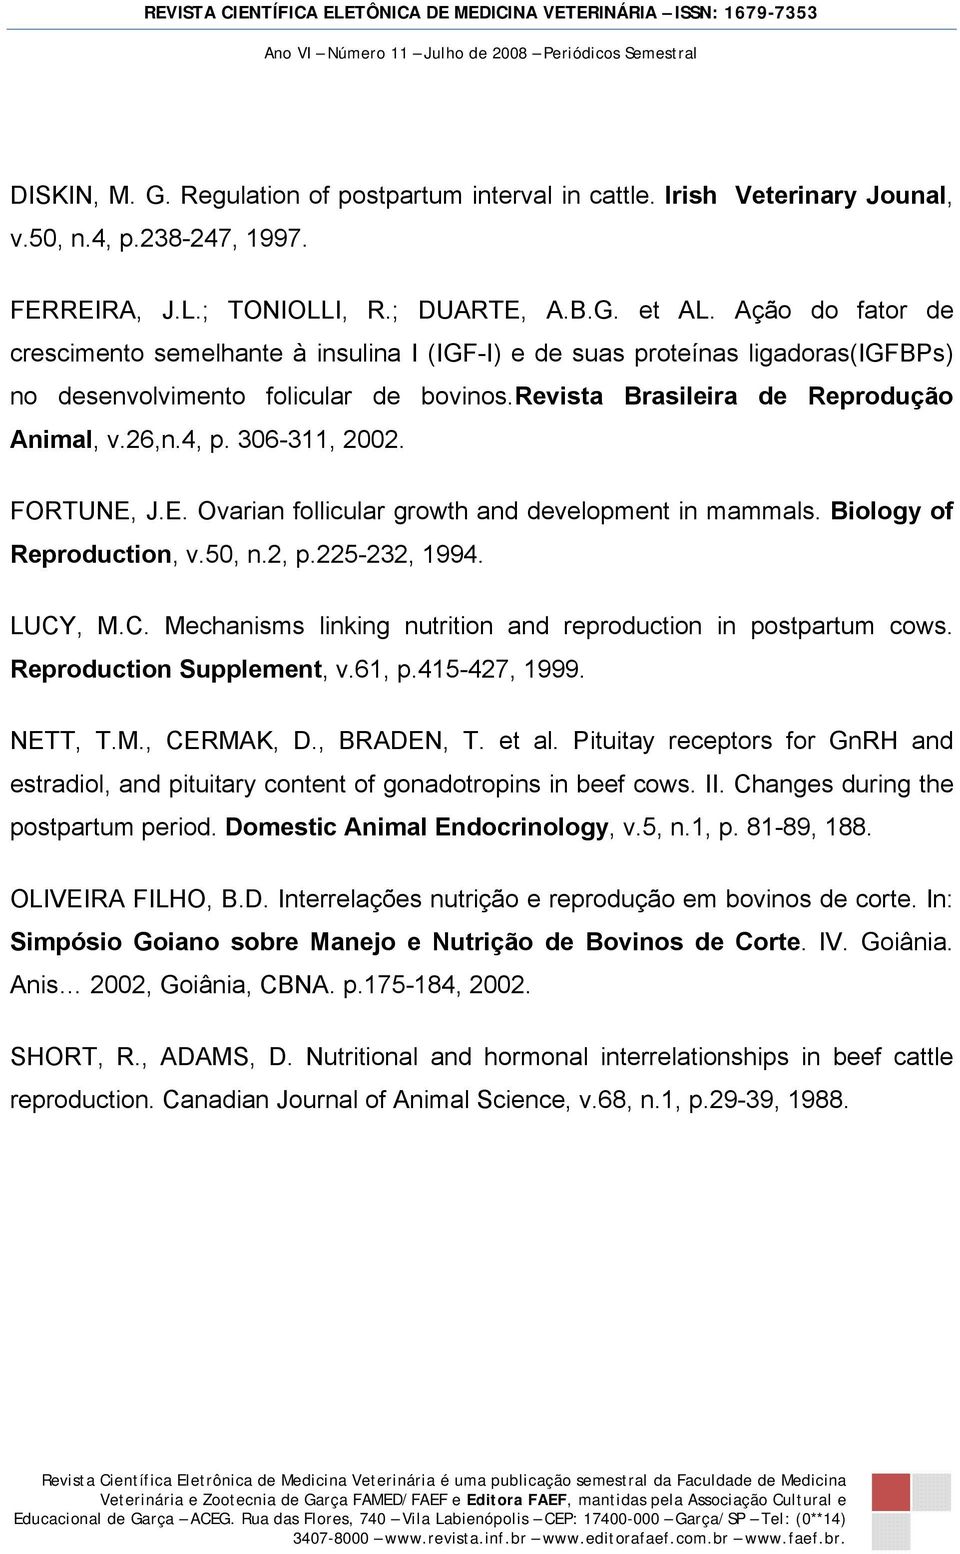 306-311, 2002. FORTUNE, J.E. Ovarian follicular growth and development in mammals. Biology of Reproduction, v.50, n.2, p.225-232, 1994. LUCY